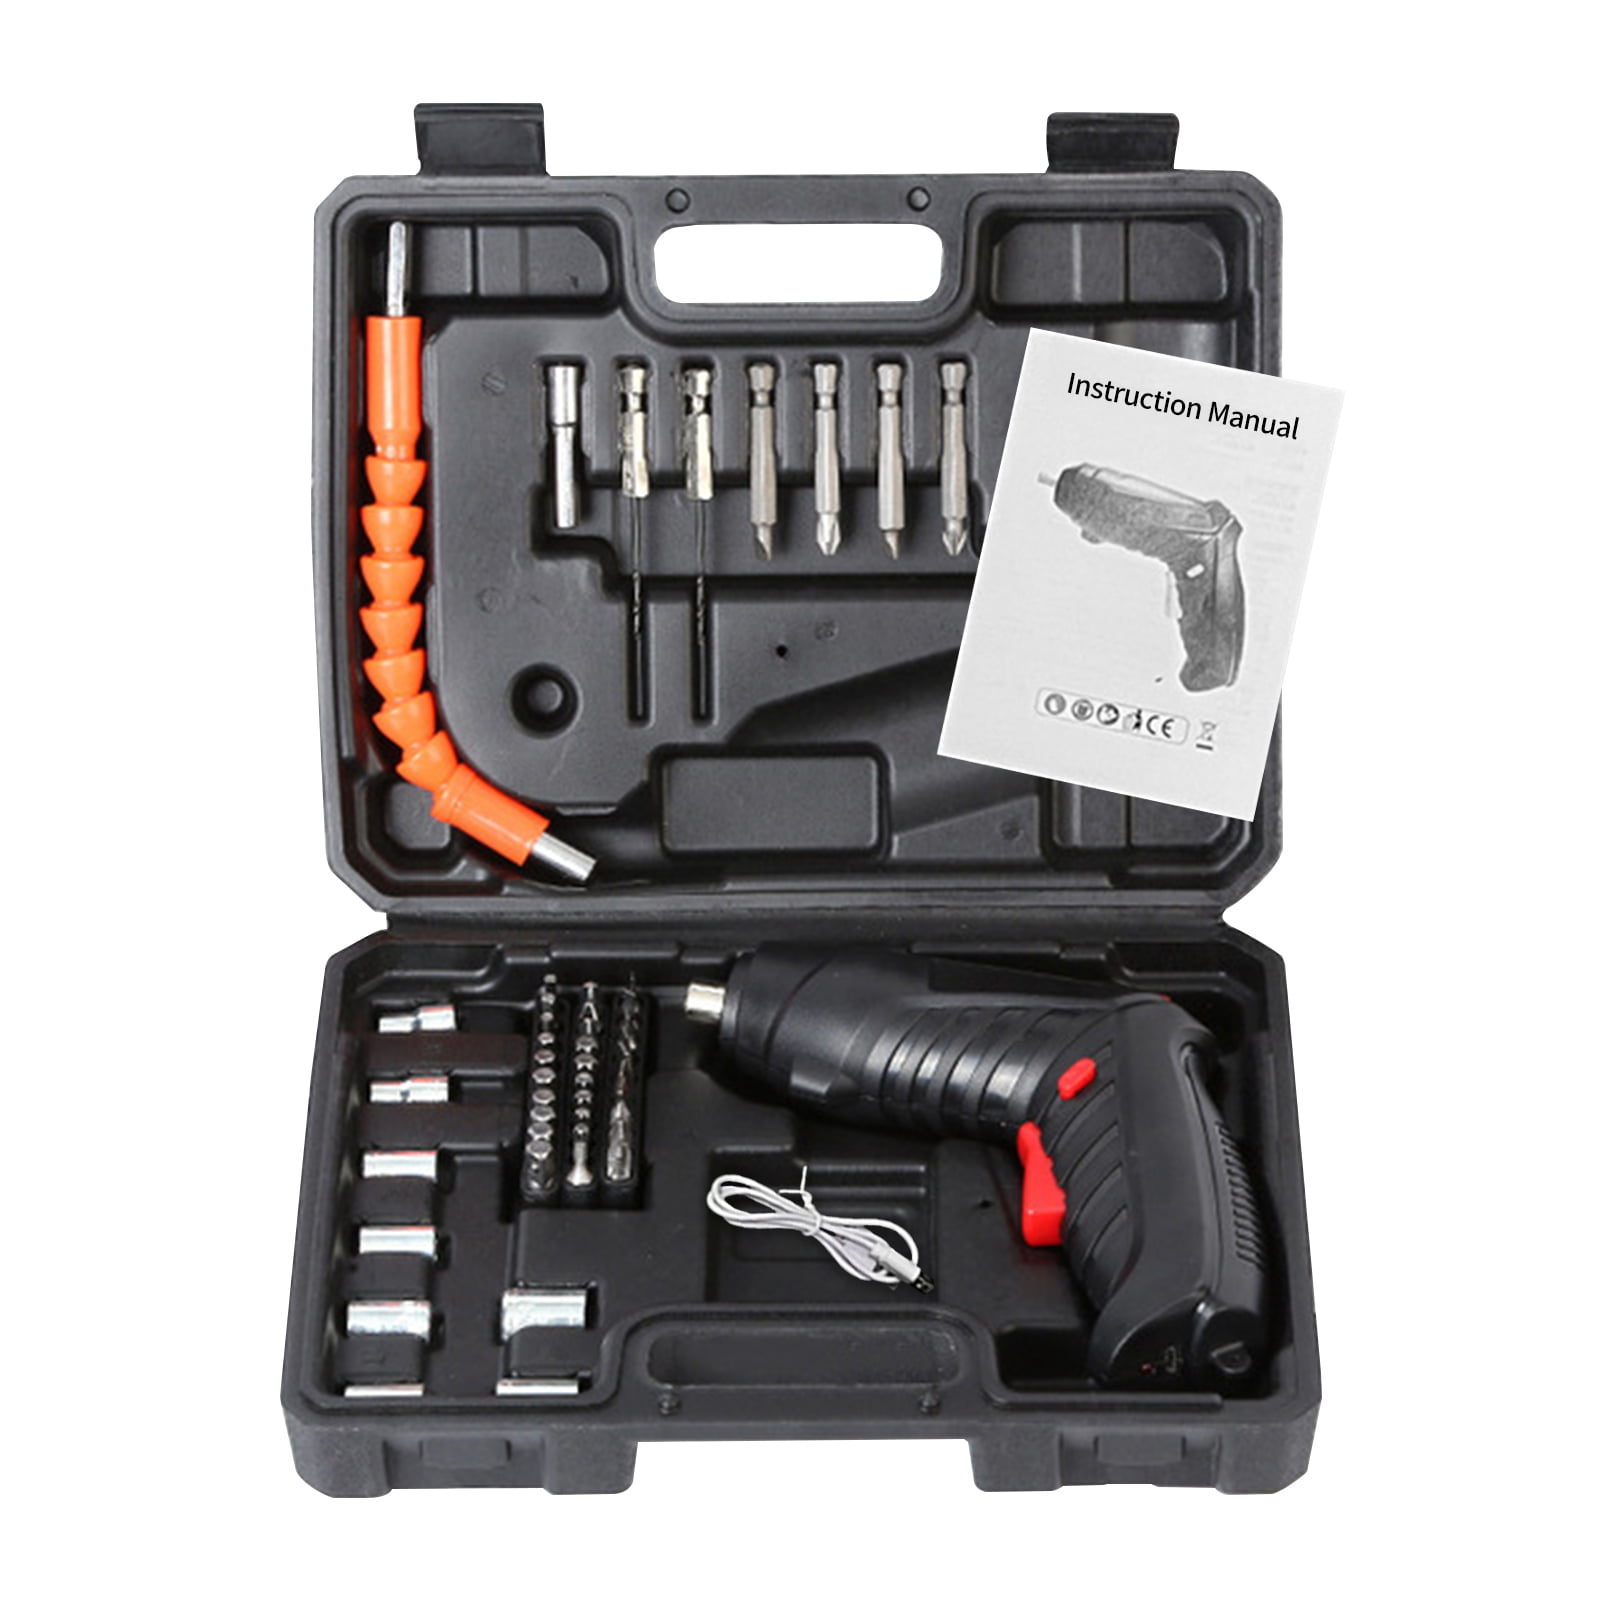 PROSTORMER 20V Max 2.0Ah Lithium Compact Drill with LED Light 30pcs Accessories and Carrying Case Included 2-Speed Max Torque 310 In-lbs 1 Hour Fast Charger 3/8 Cordless Drill Driver Set